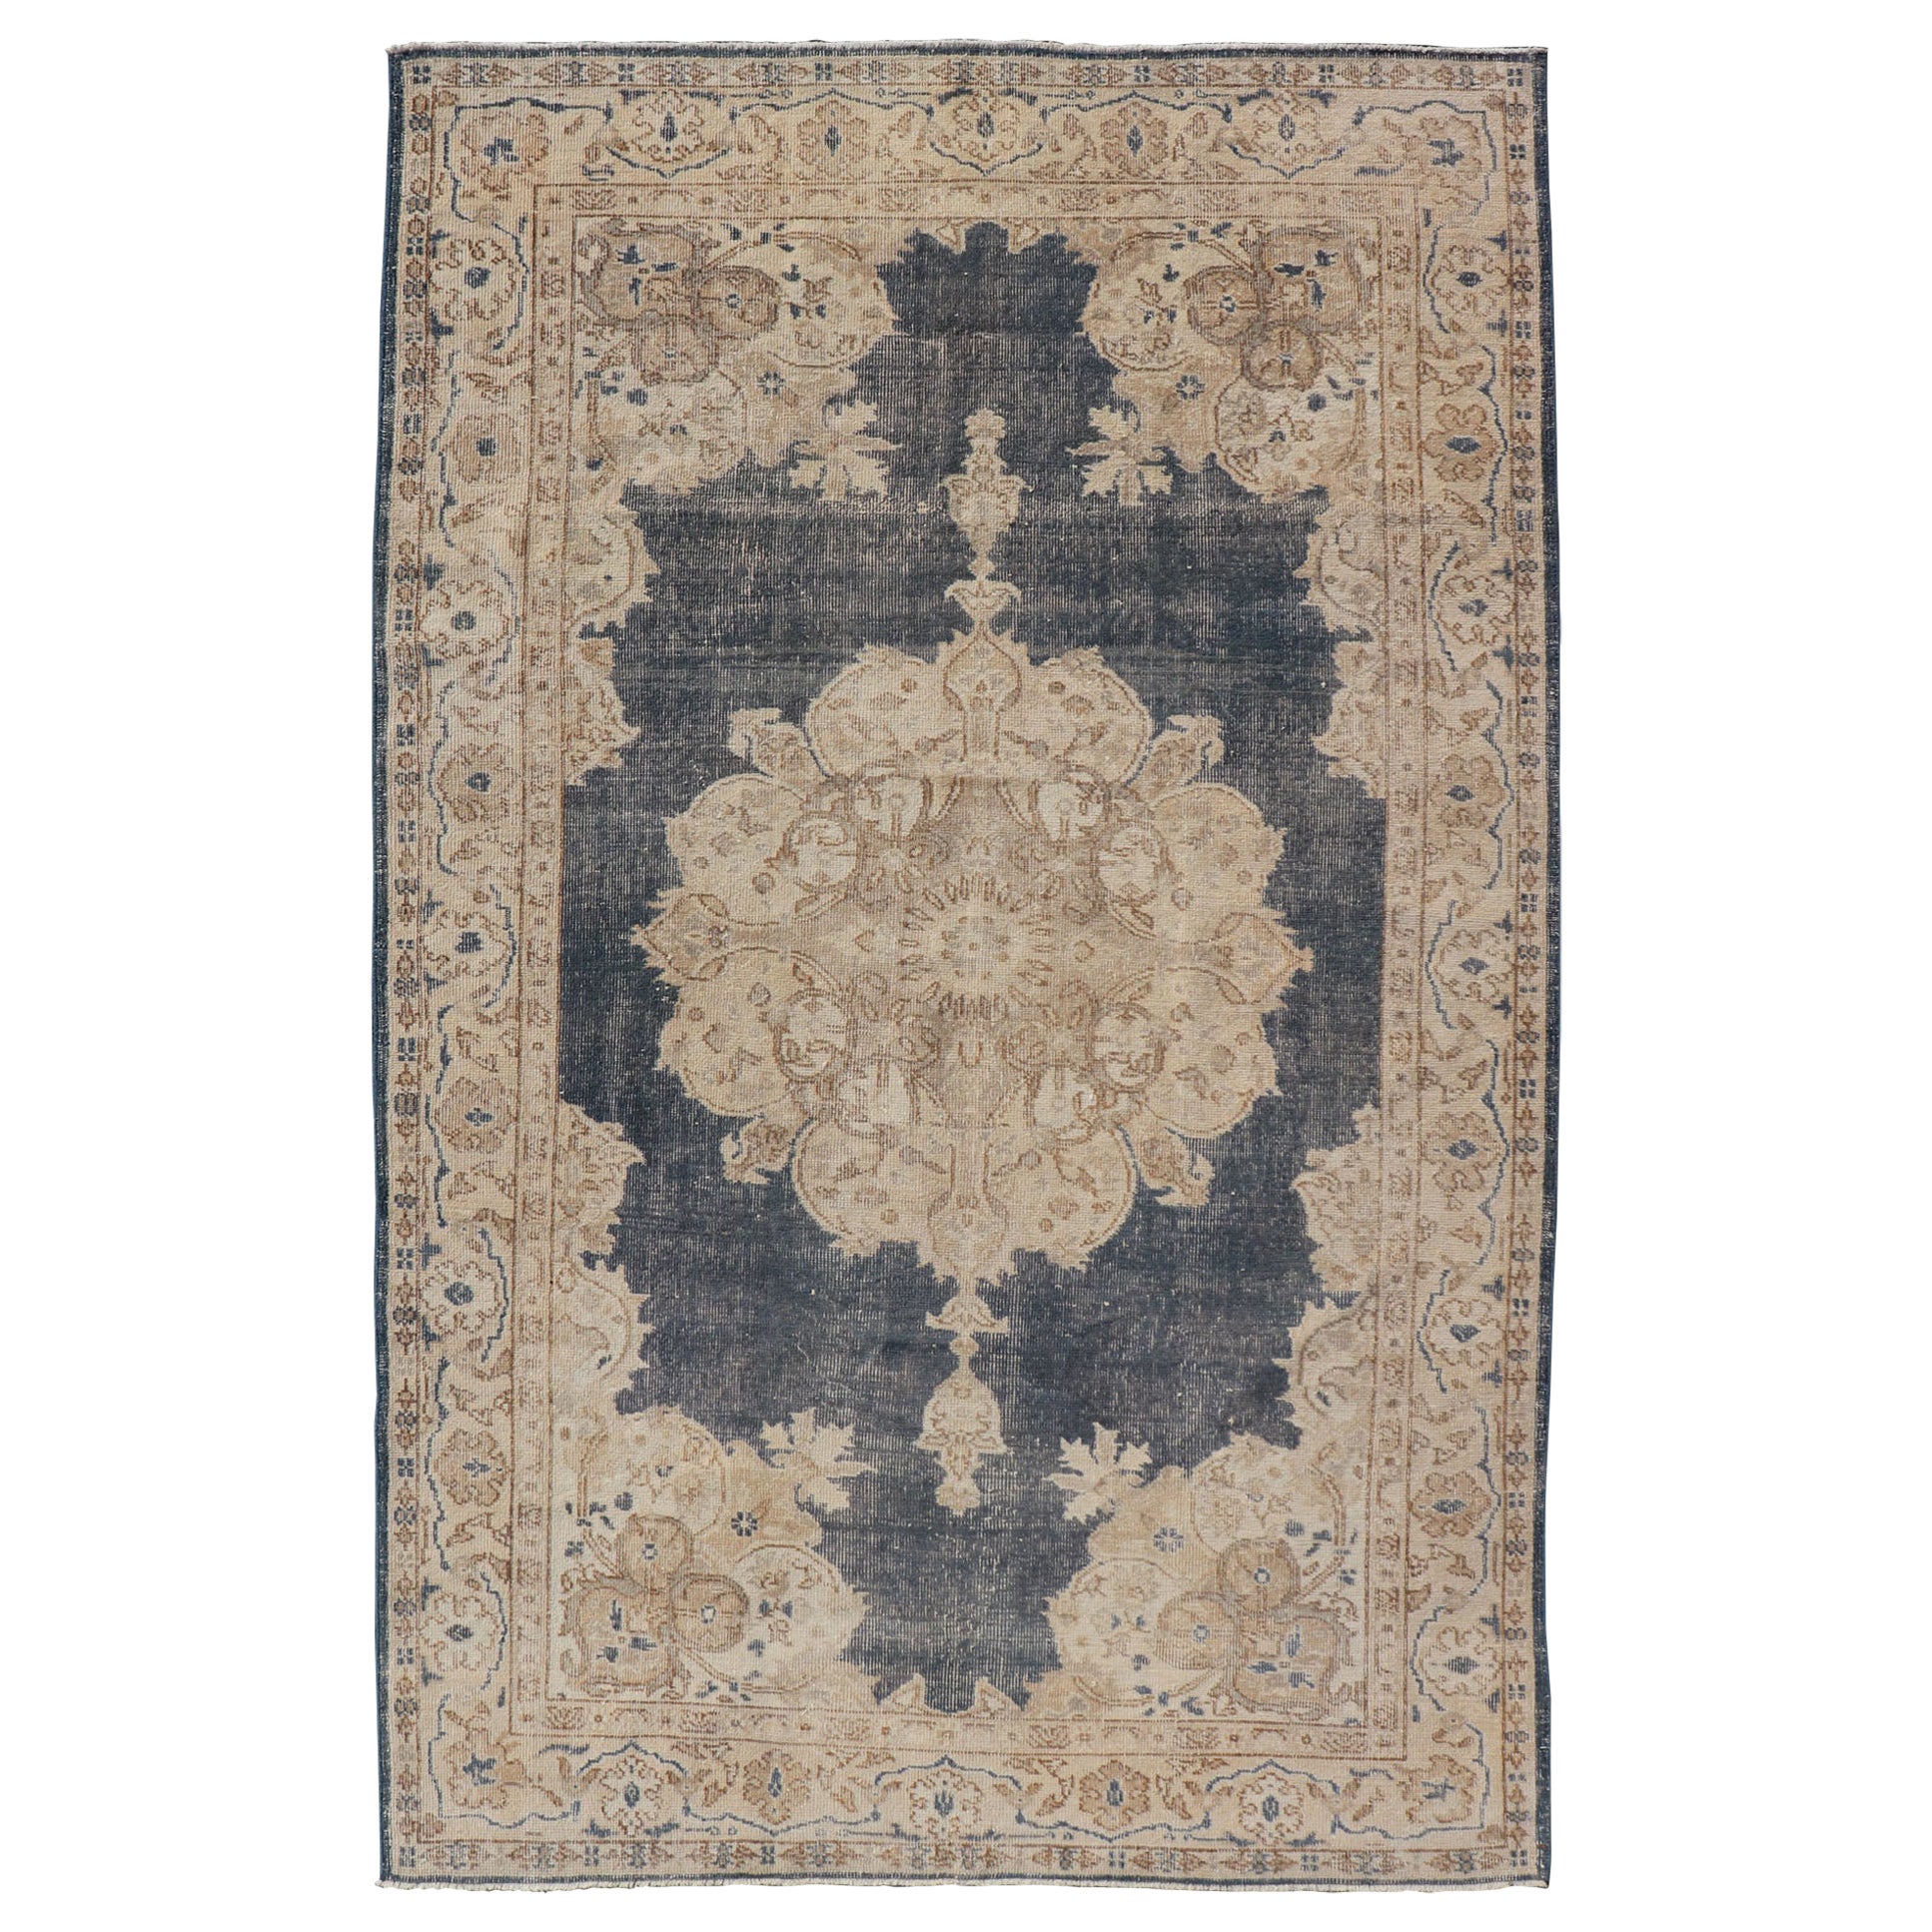 Distressed Turkish Carpet with Floral Design in Blue, Tan, Taupe, and Cream For Sale